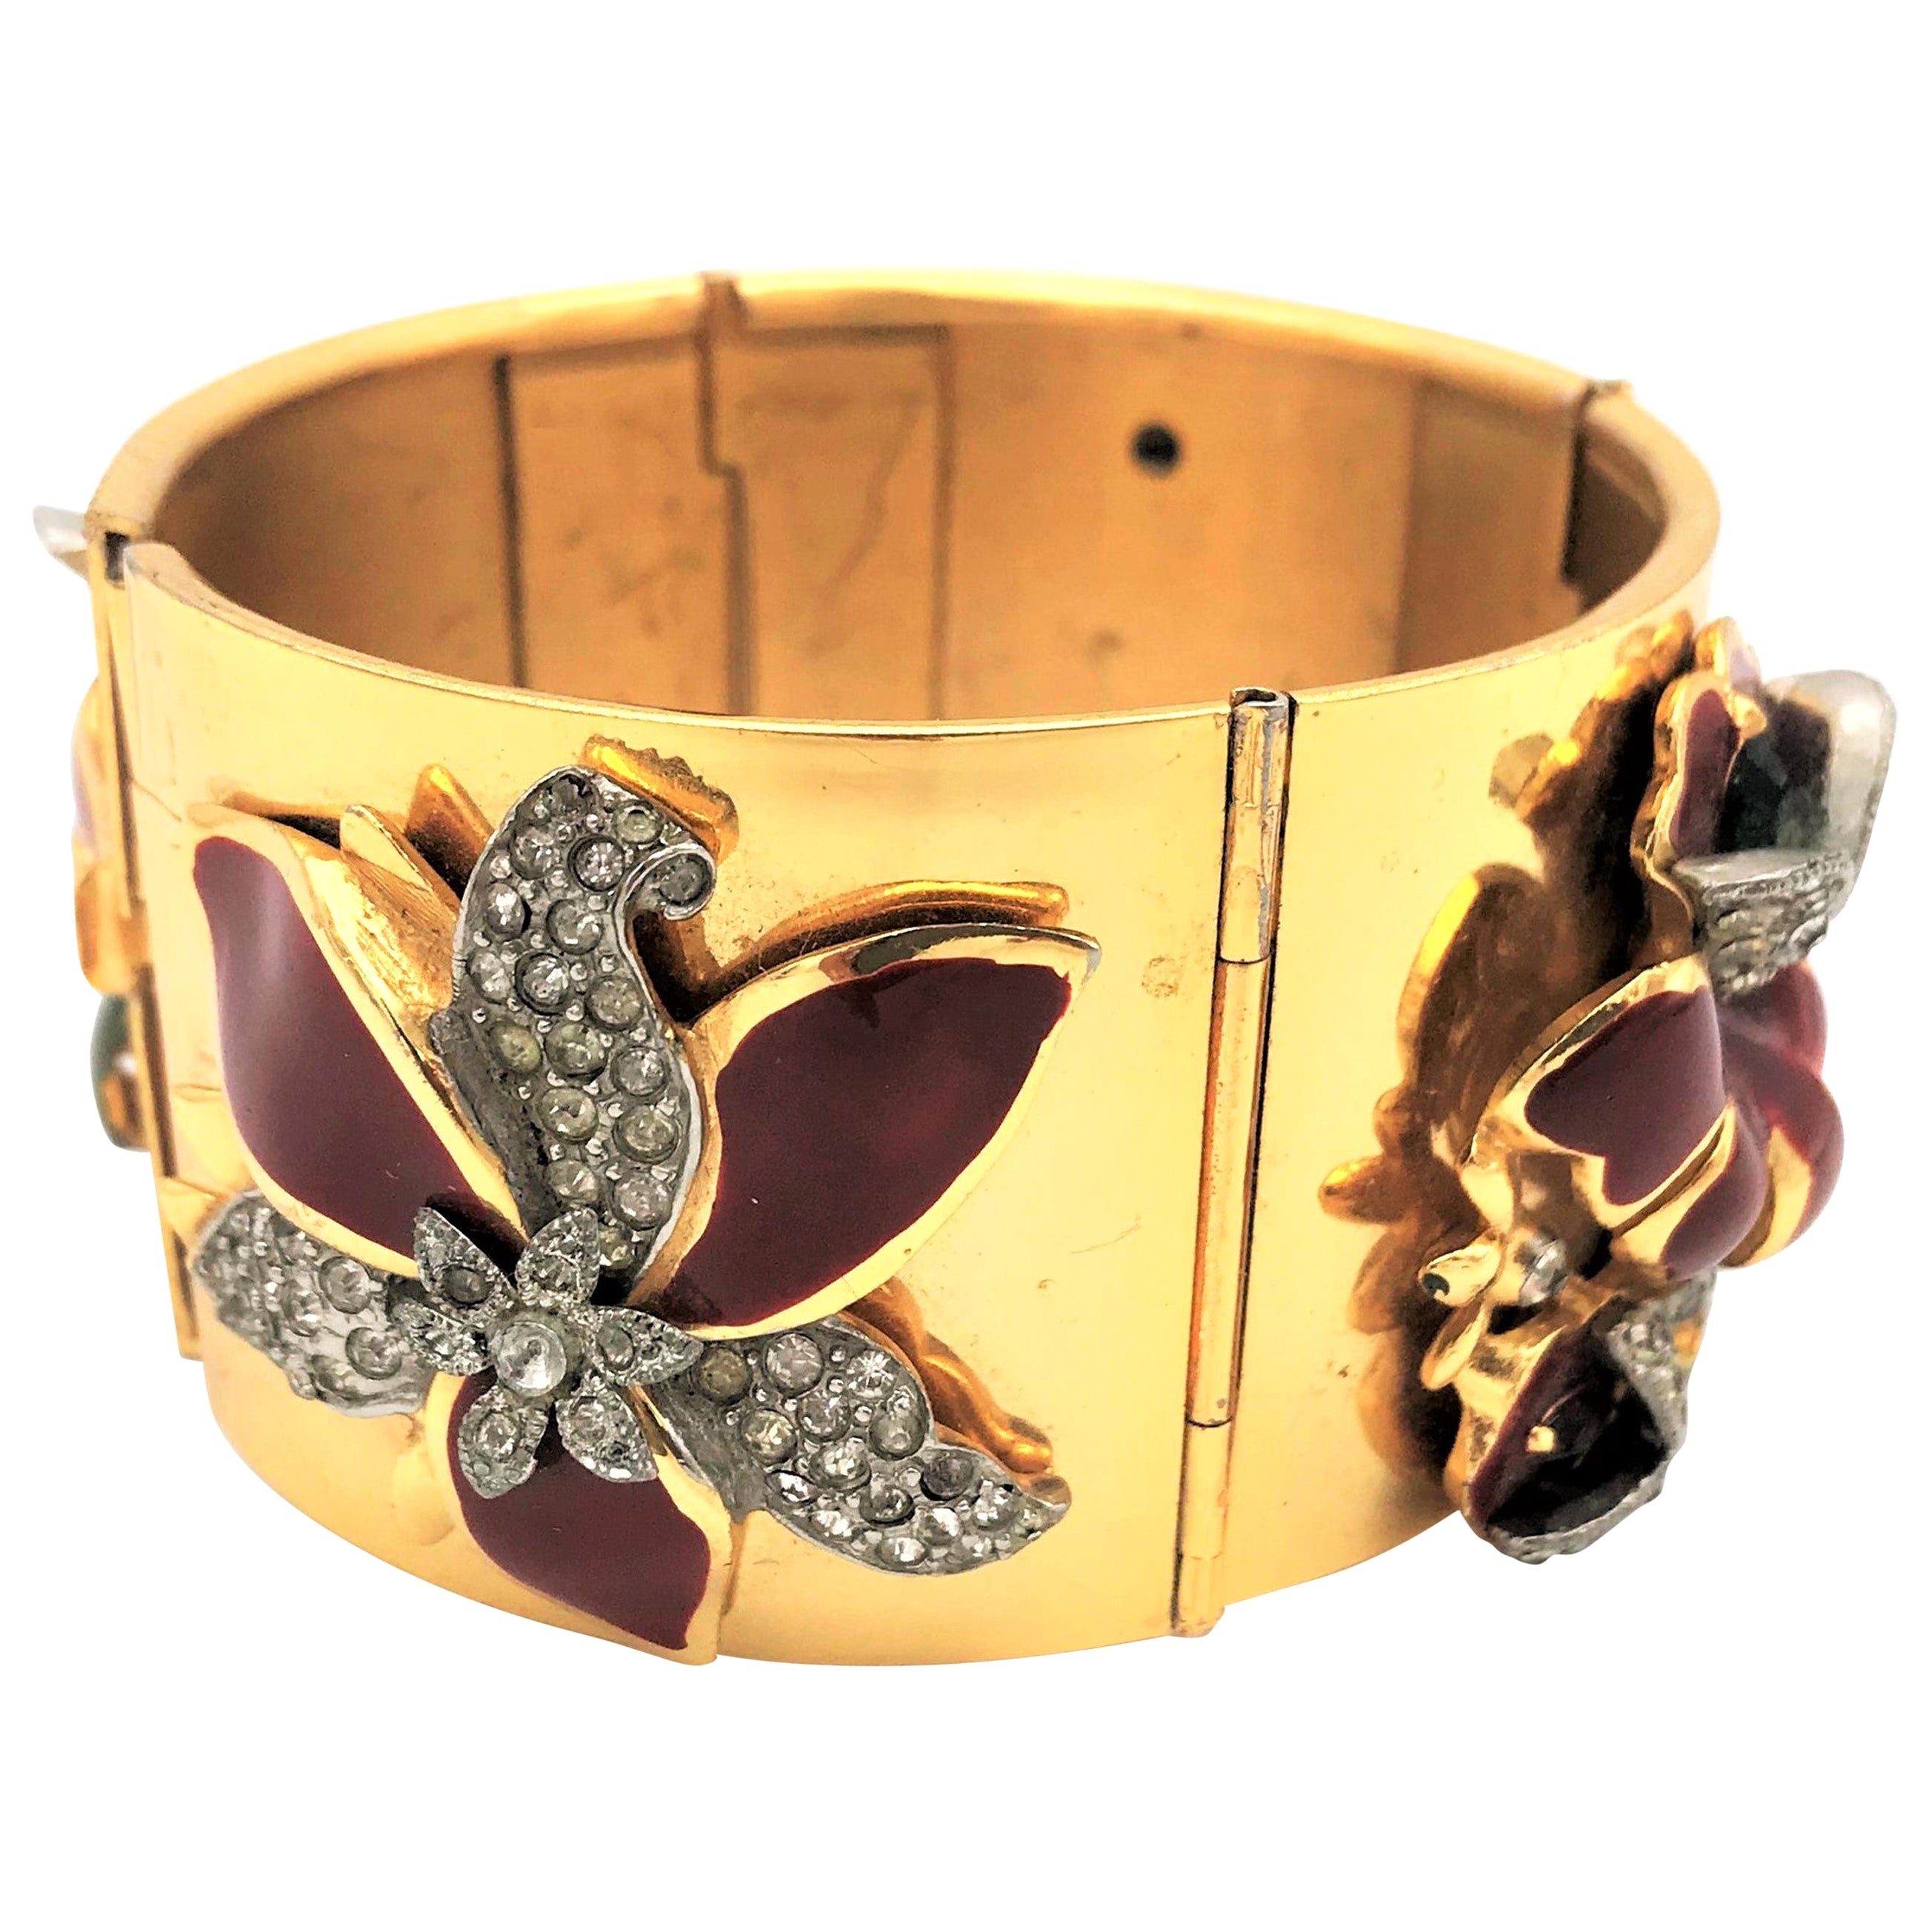 Gold plated hinged bracelet with Coro enamel flowers attached from the 1940s  